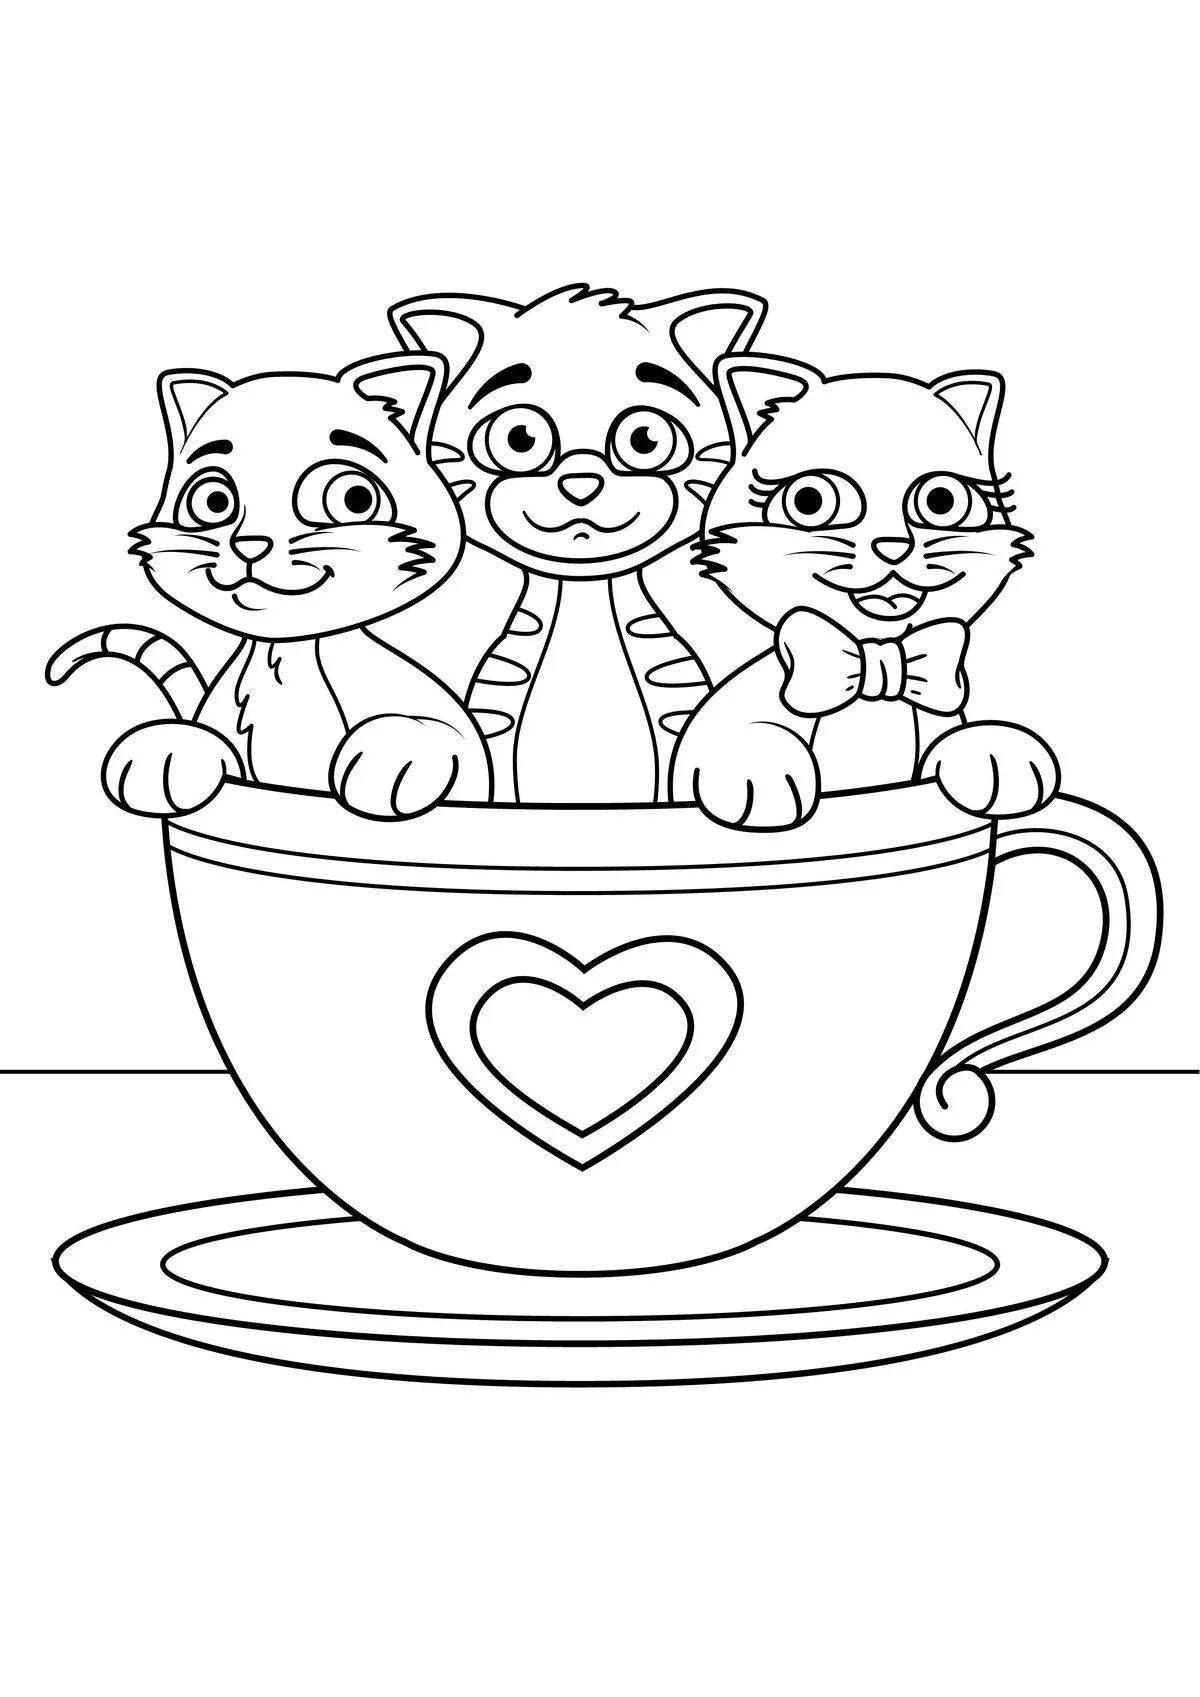 Coloring three kittens